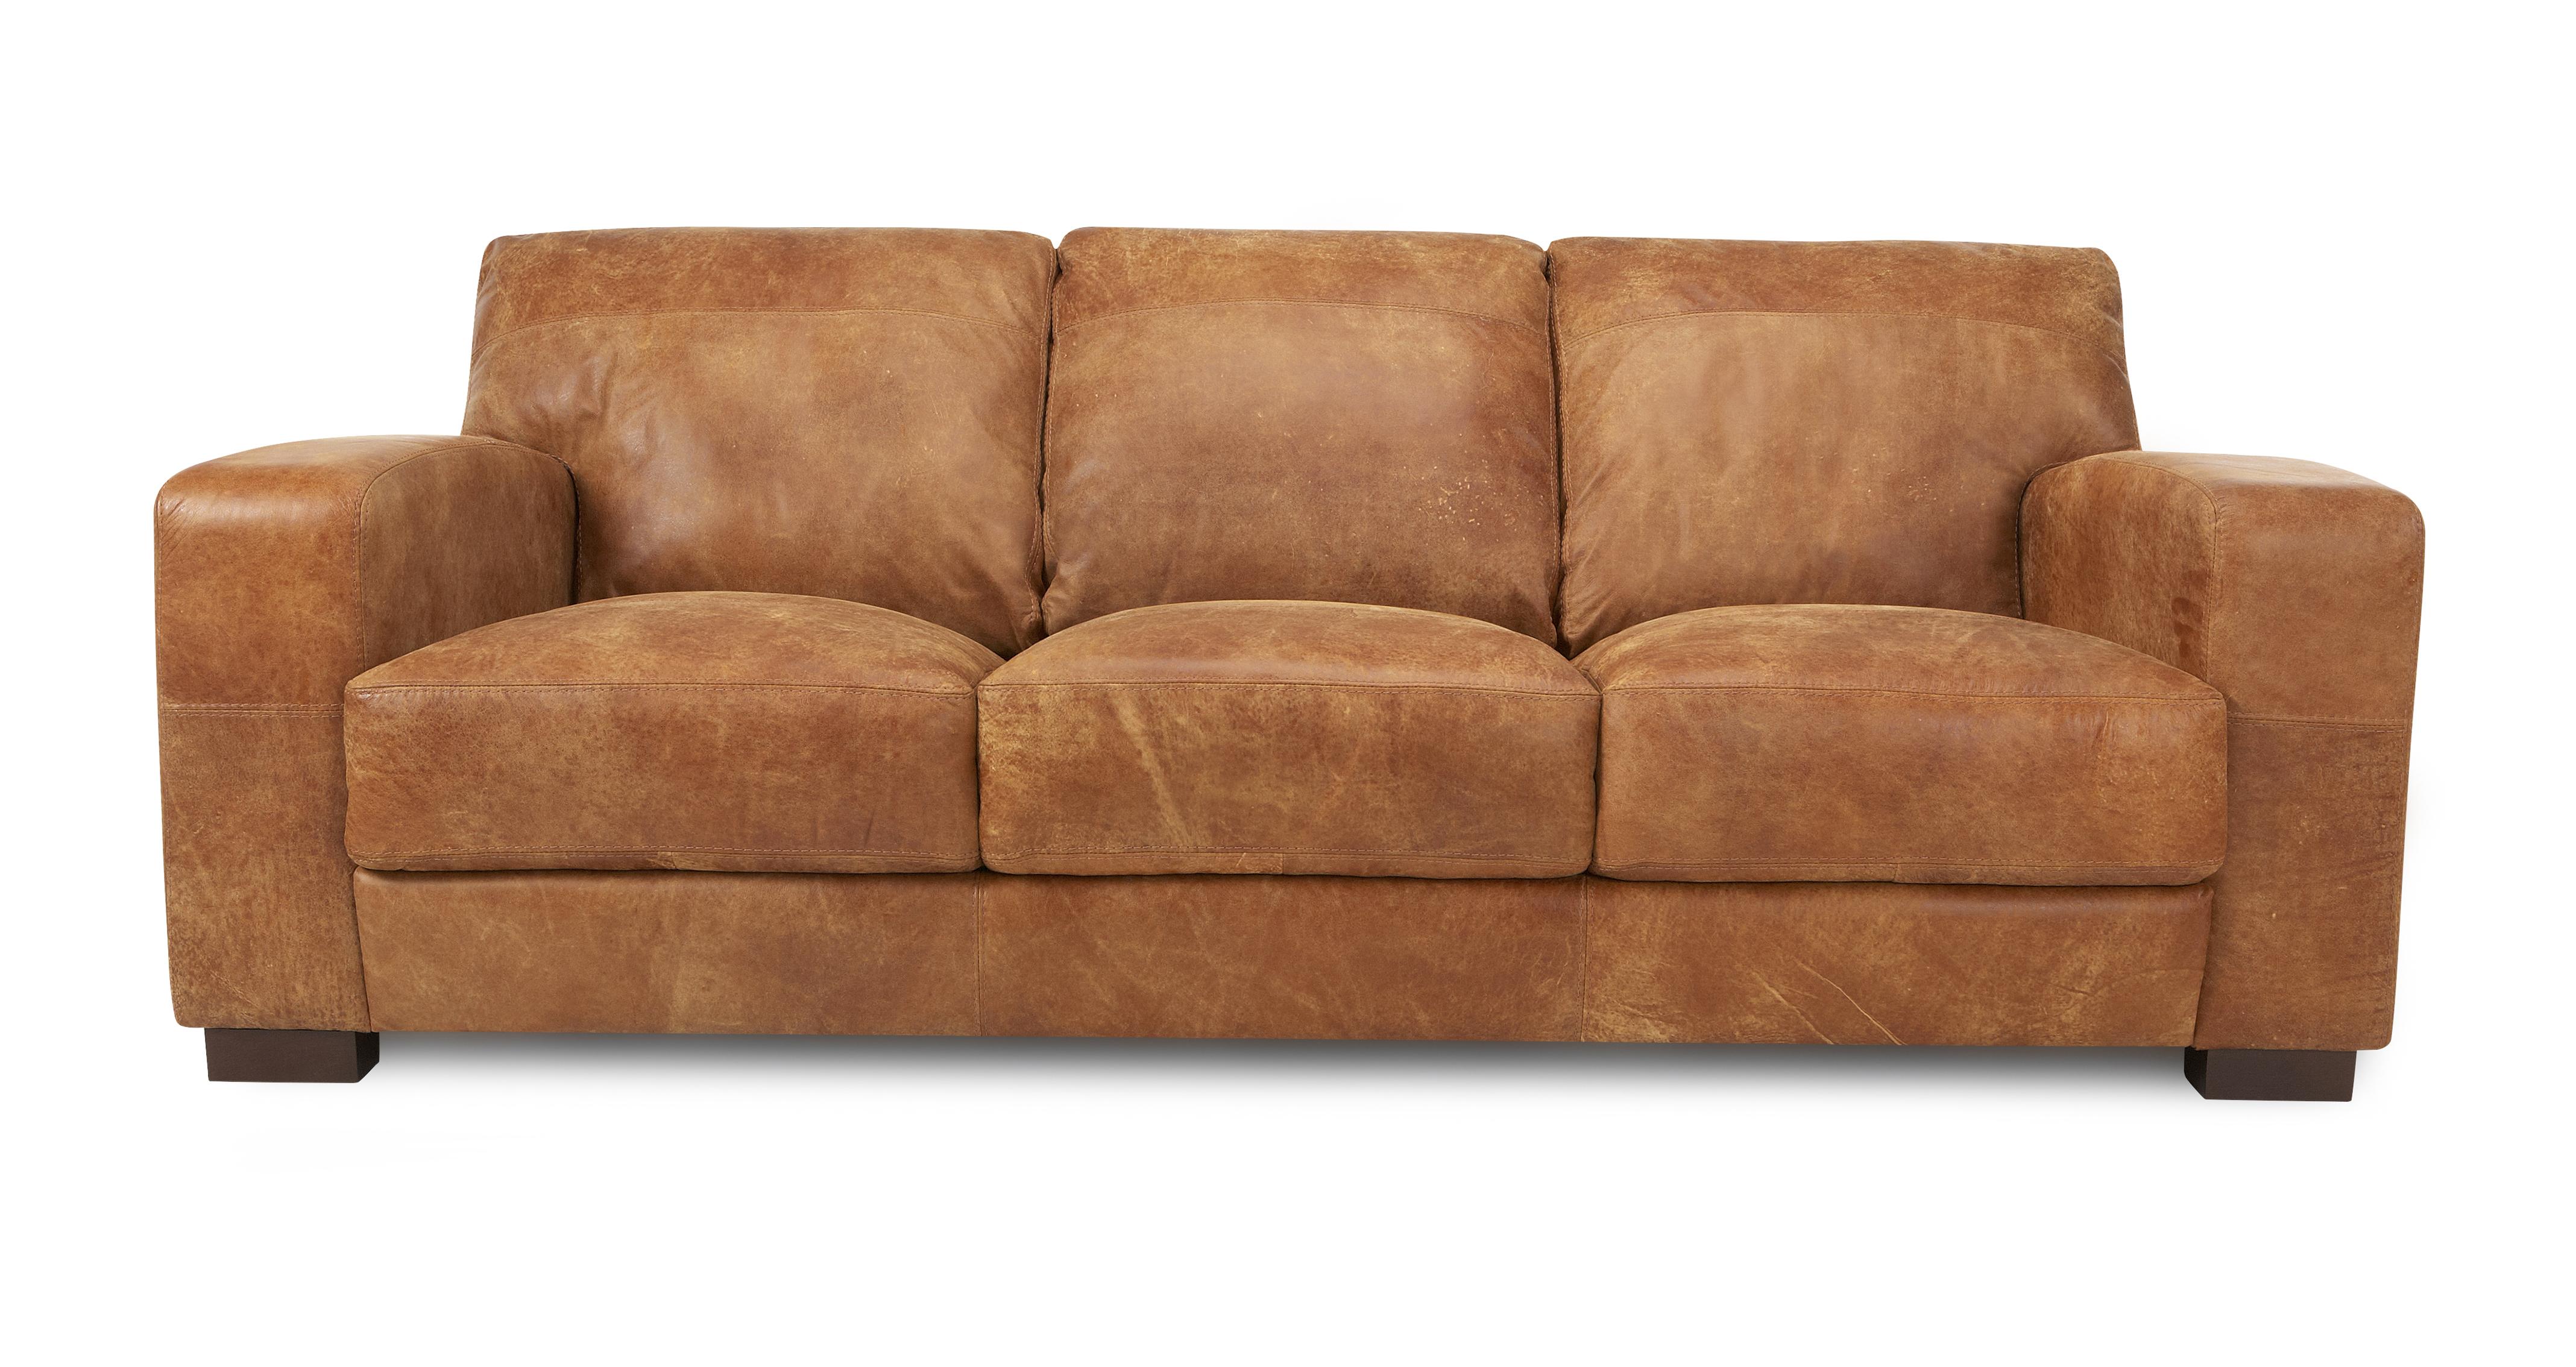 dfs 3 seater brown leather sofa